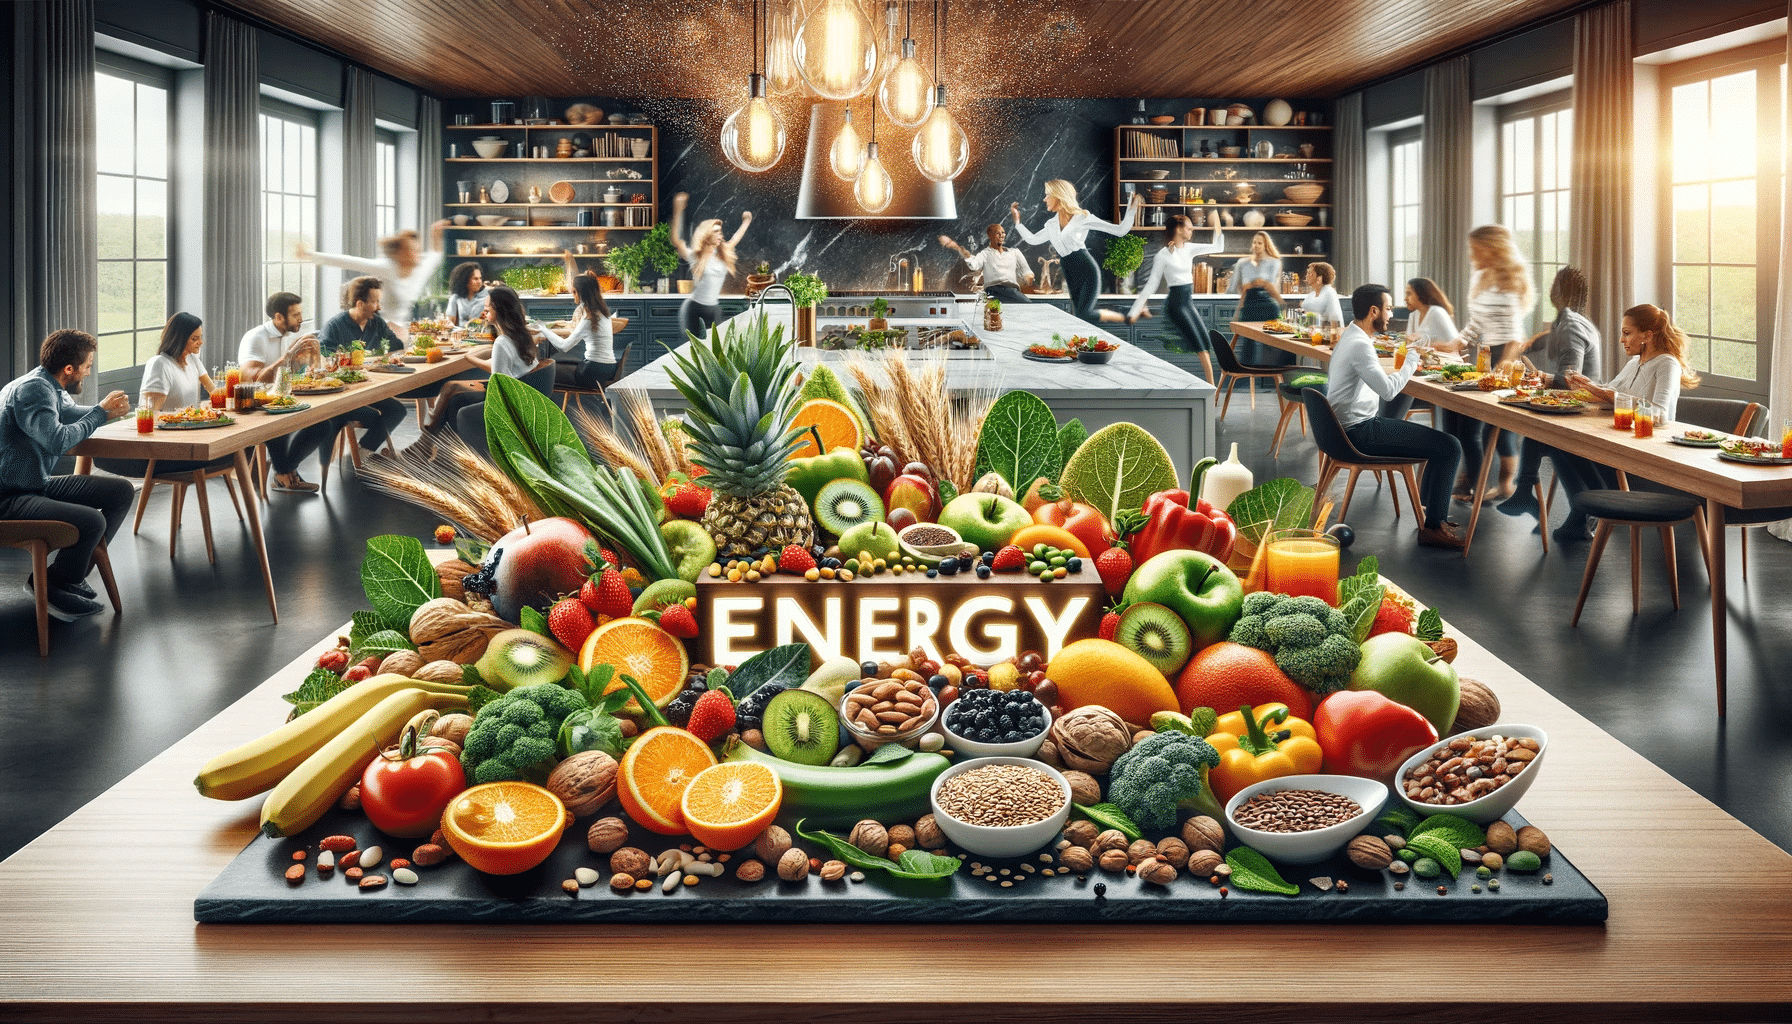 Horizontal image featuring an array of nutritious foods for energy set in a luxurious gourmet kitchen. The scene includes a variety of vibrant healt